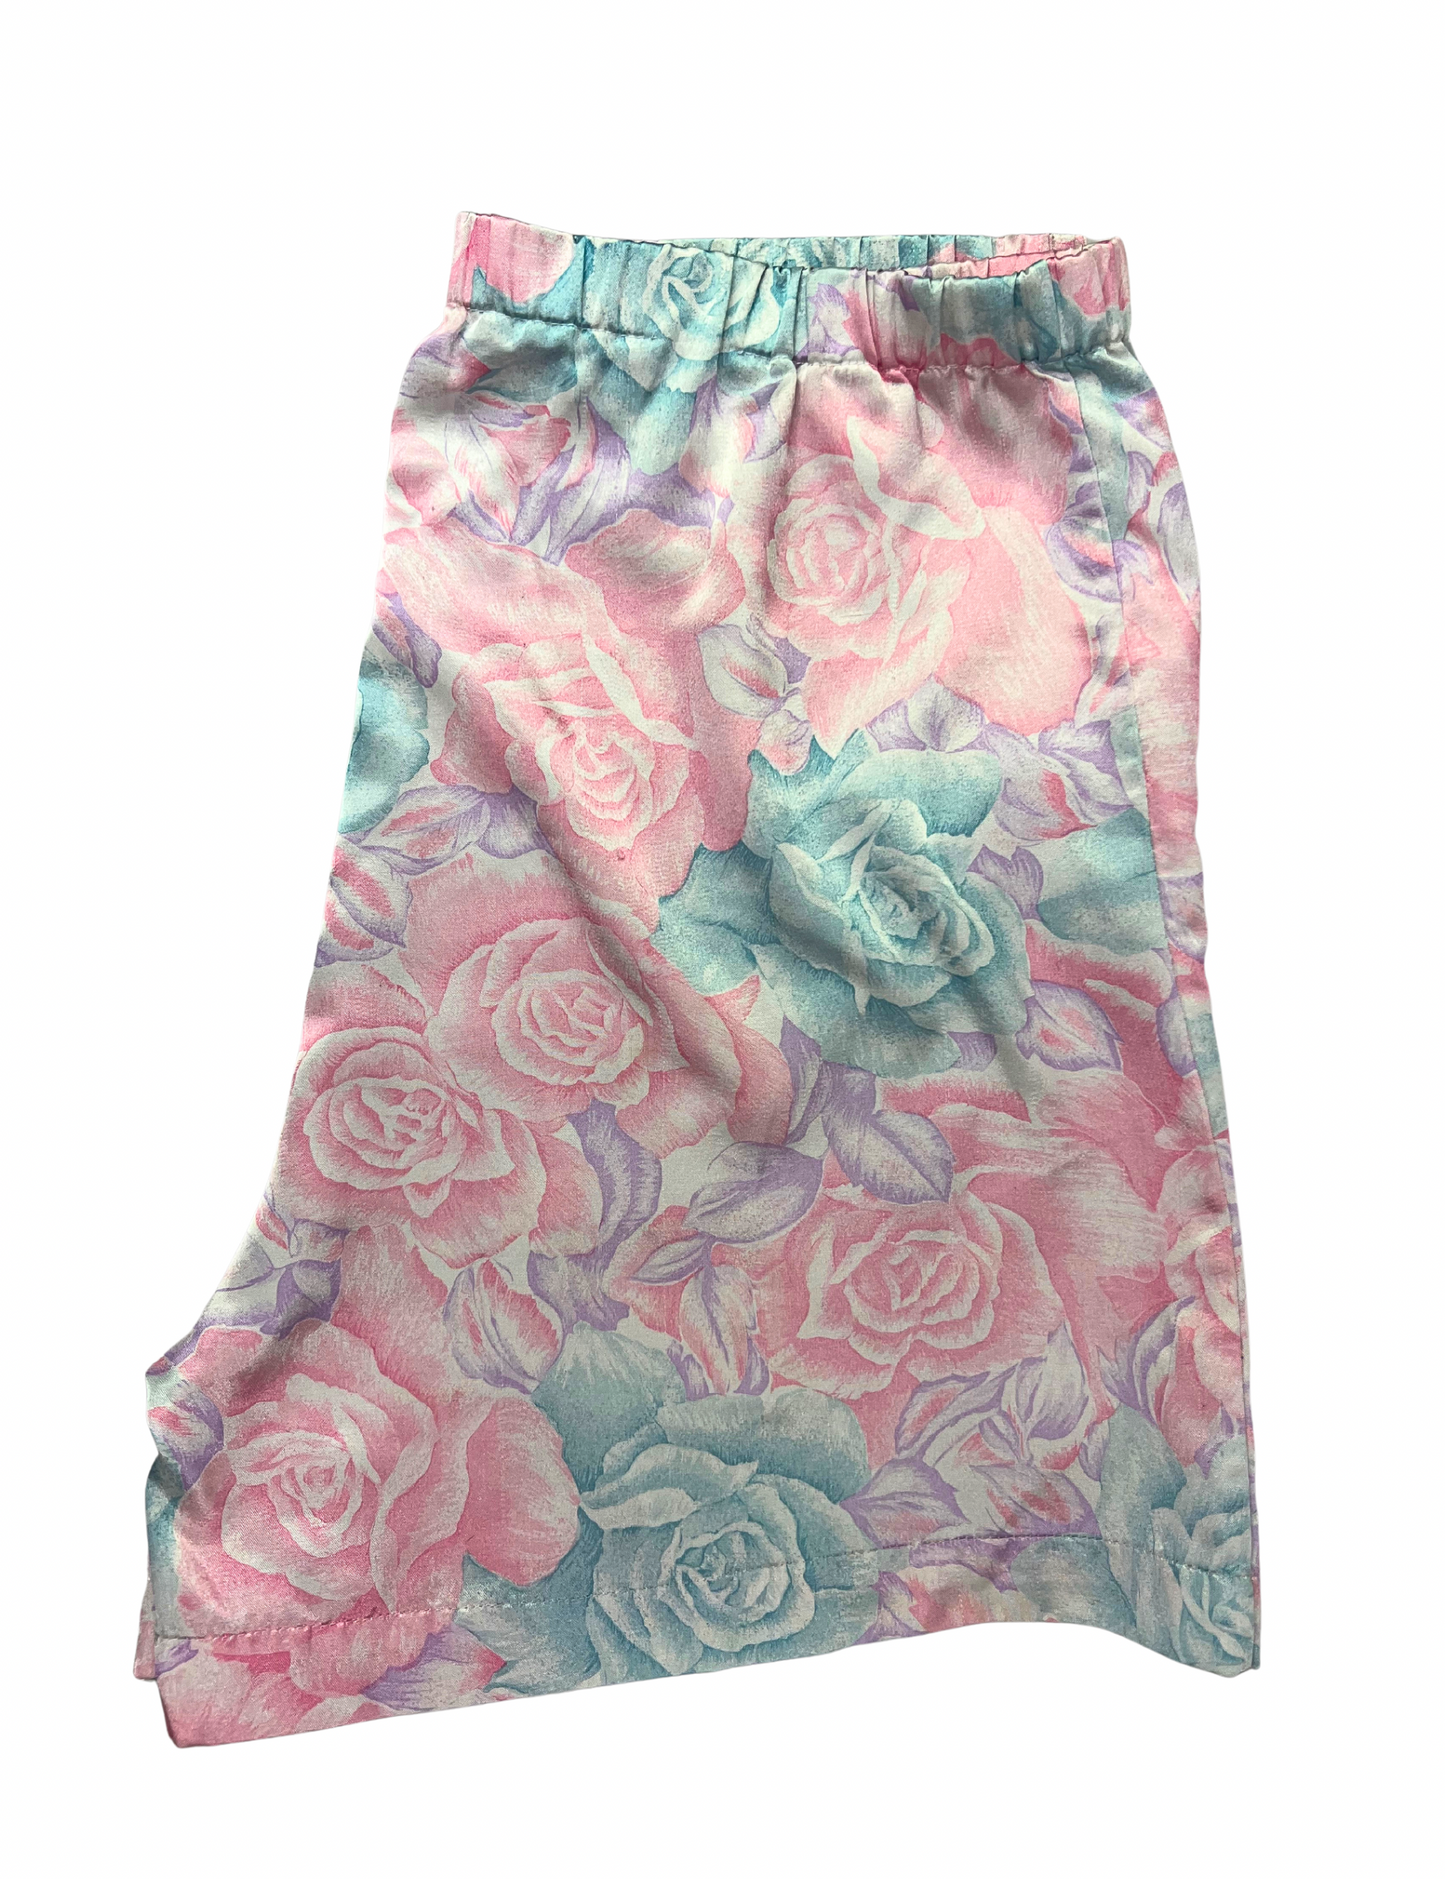 90’s Rose Print Silky Shorts fits S-M